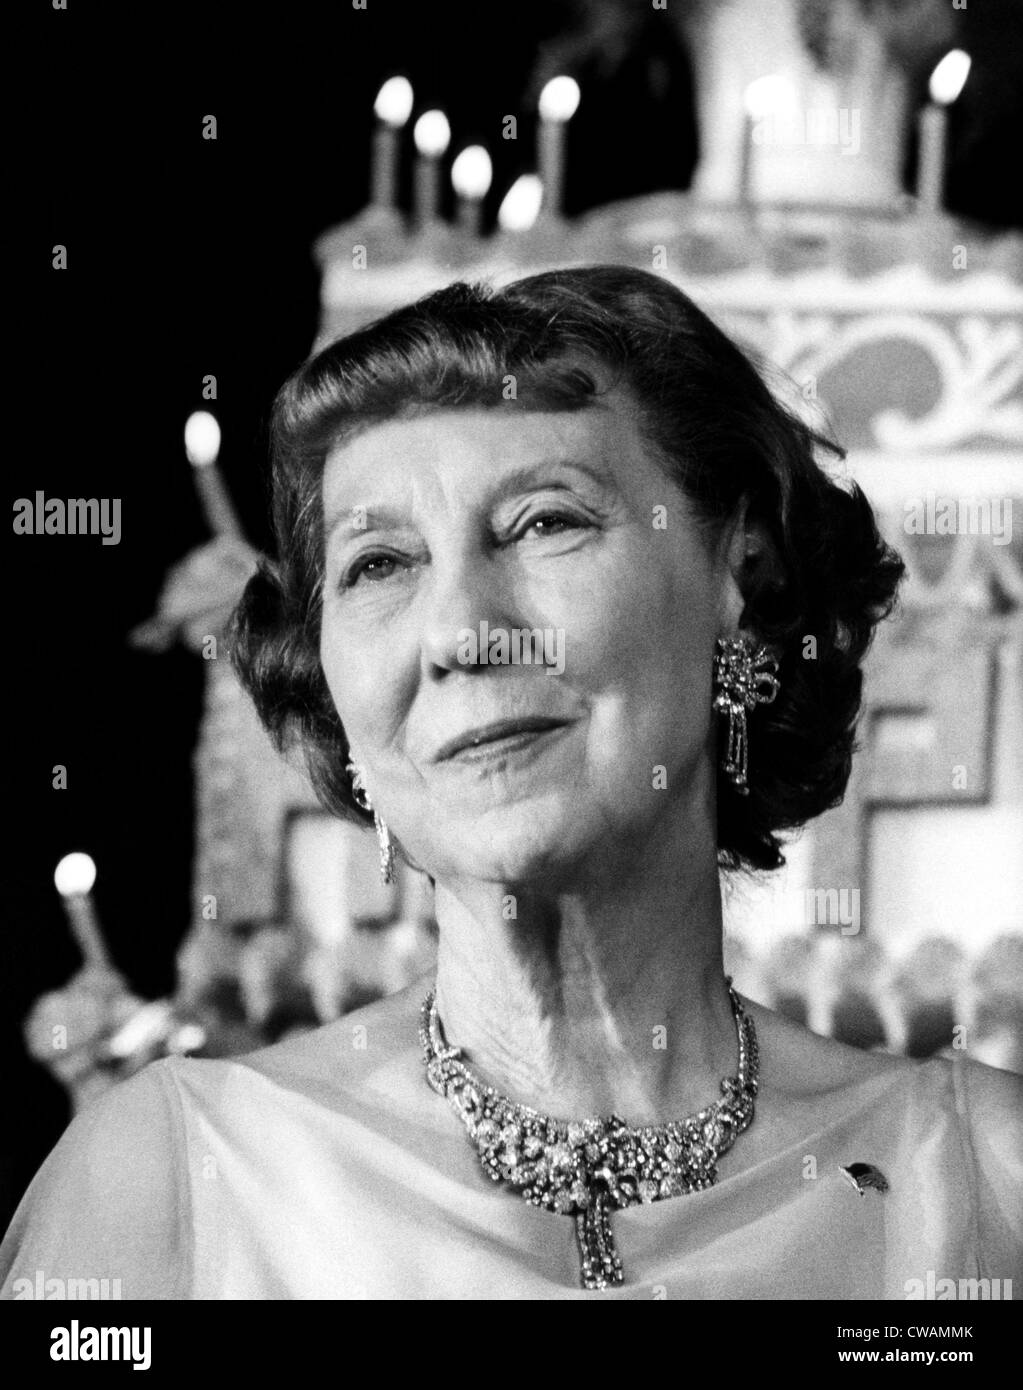 Mamie eisenhower hi-res stock photography and images - Alamy